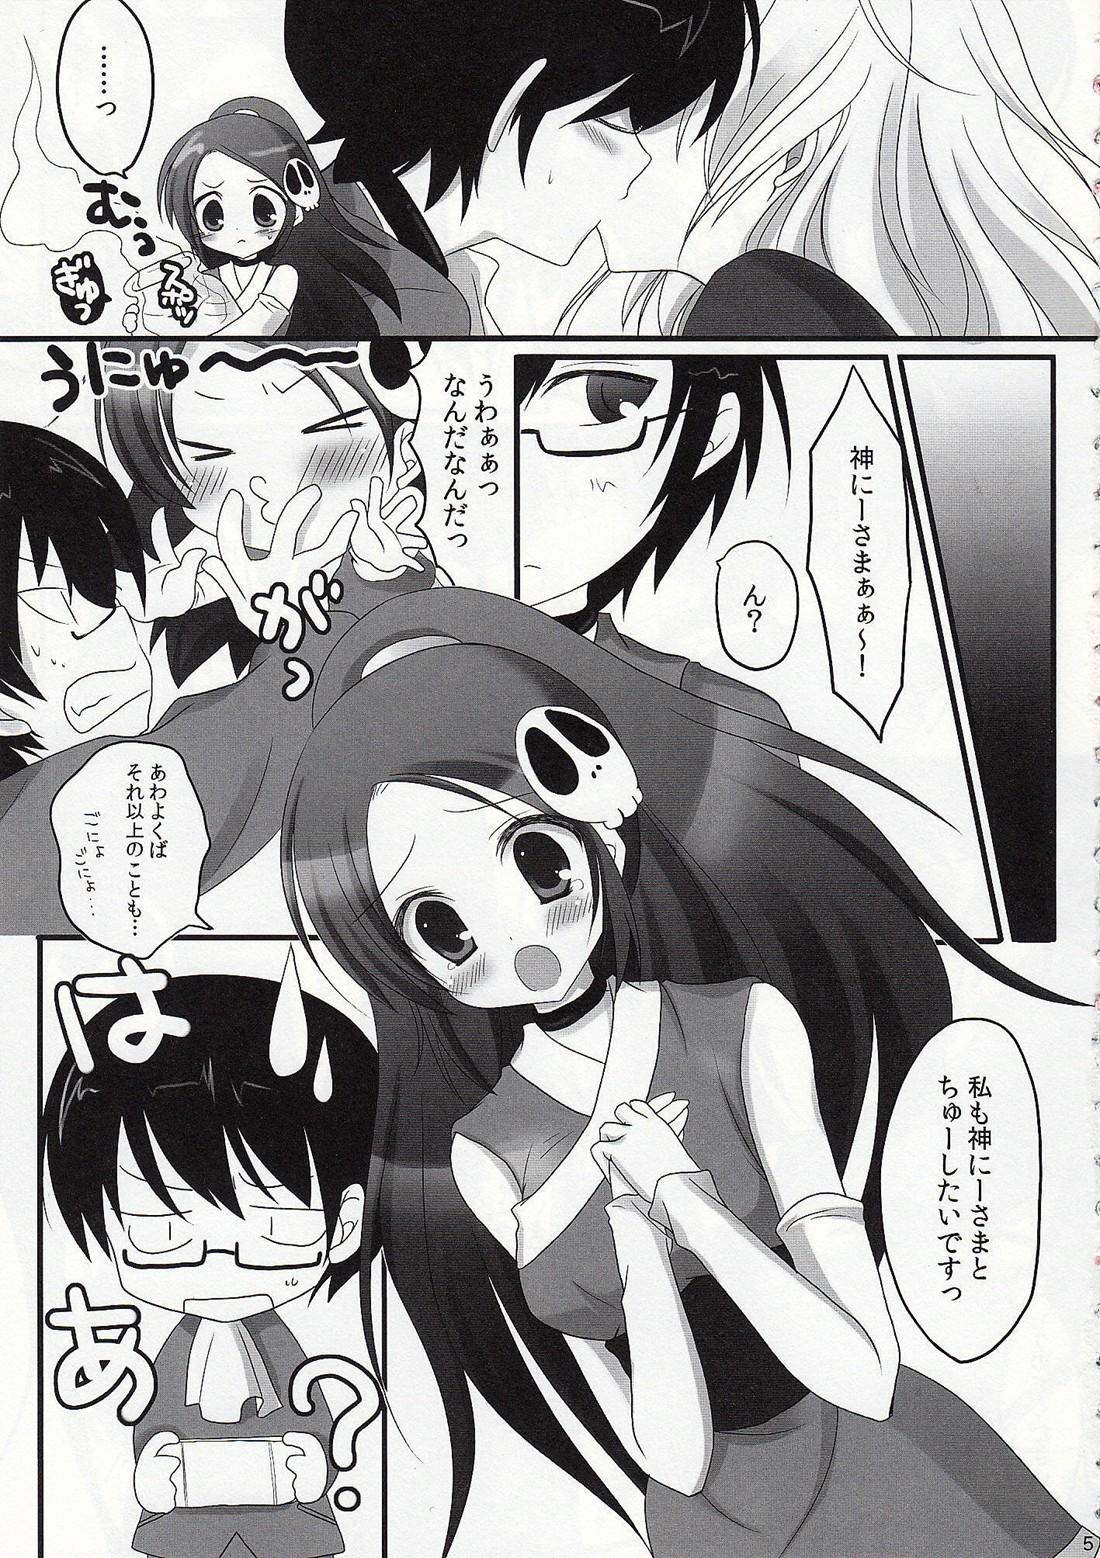 Oral Sex Kami no shiranai xxx - The world god only knows Stunning - Page 4